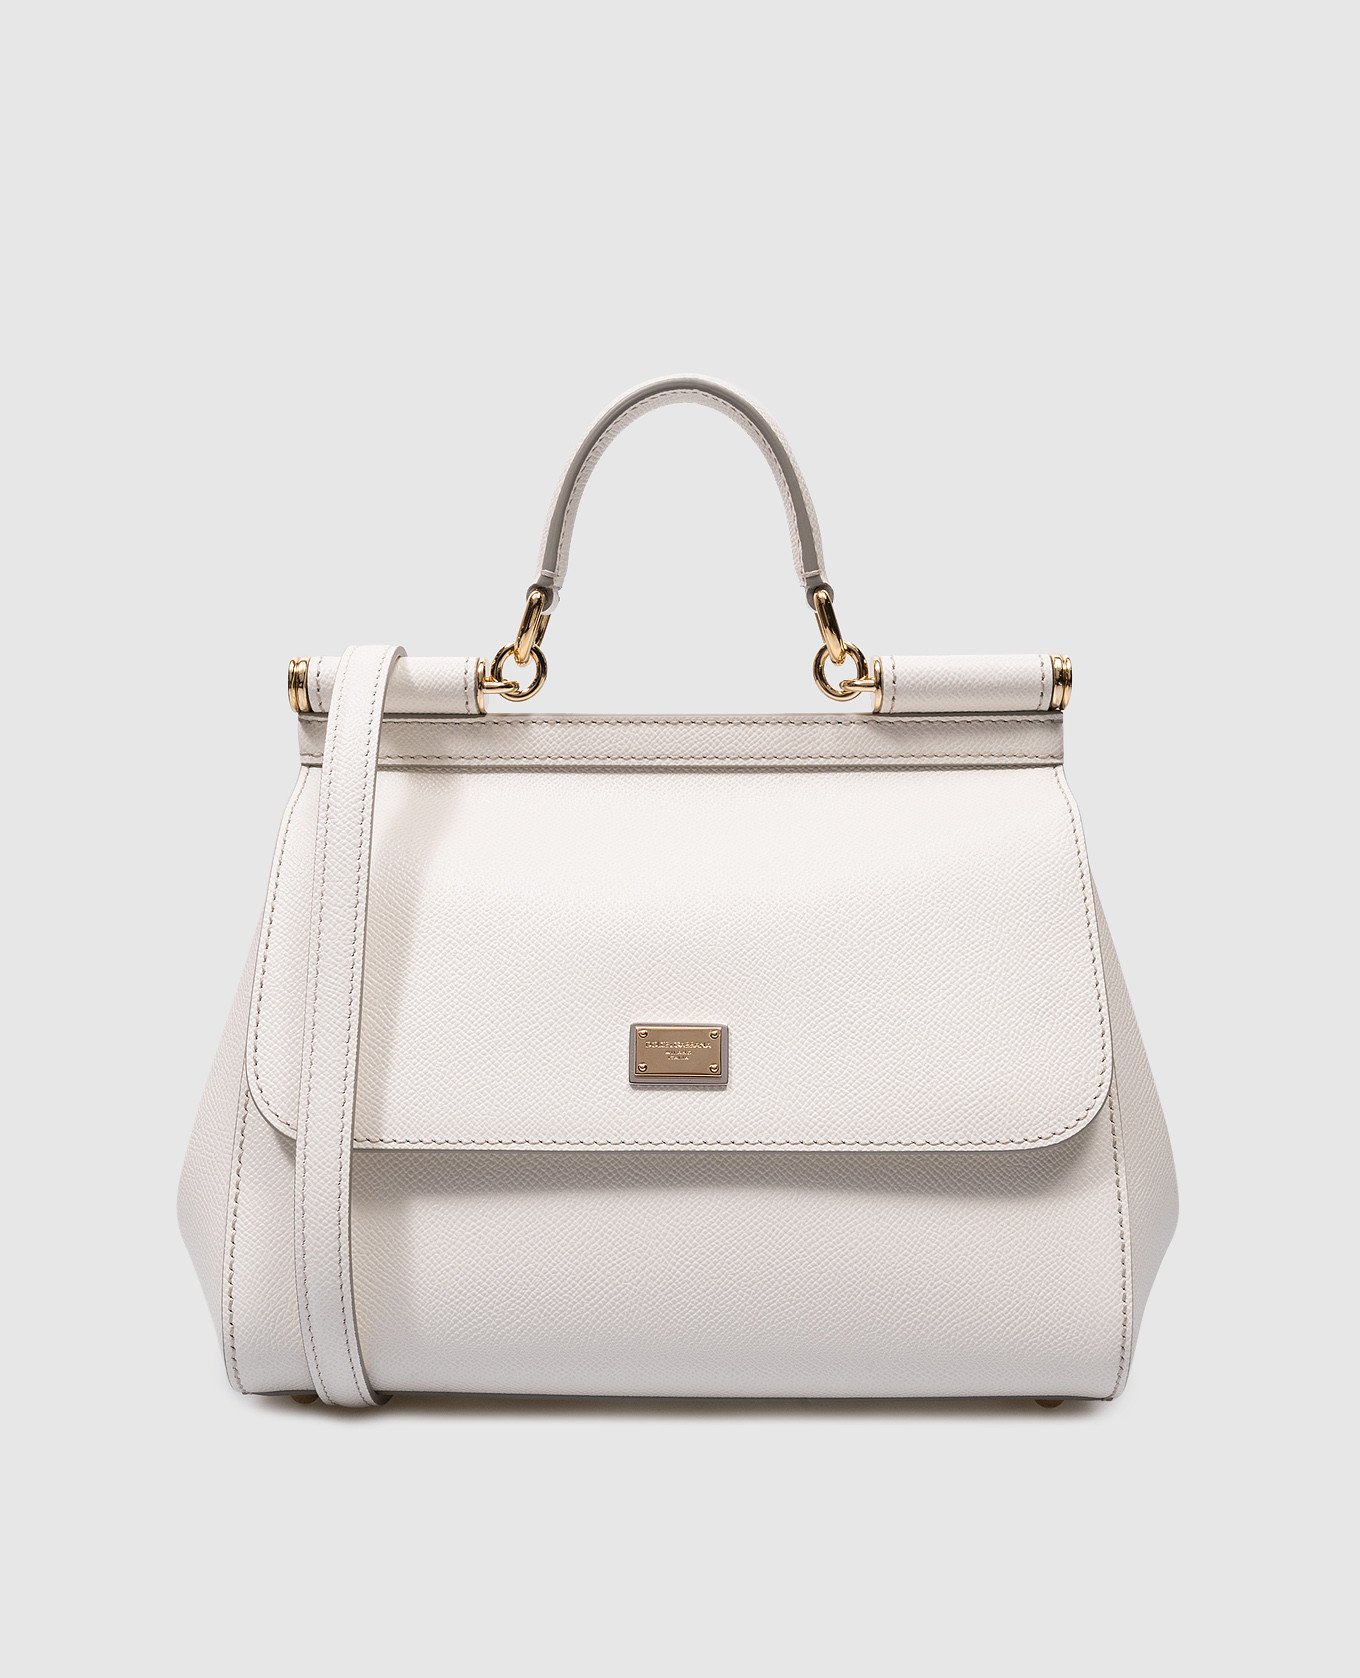 SICILY white leather satchel bag with metal logo